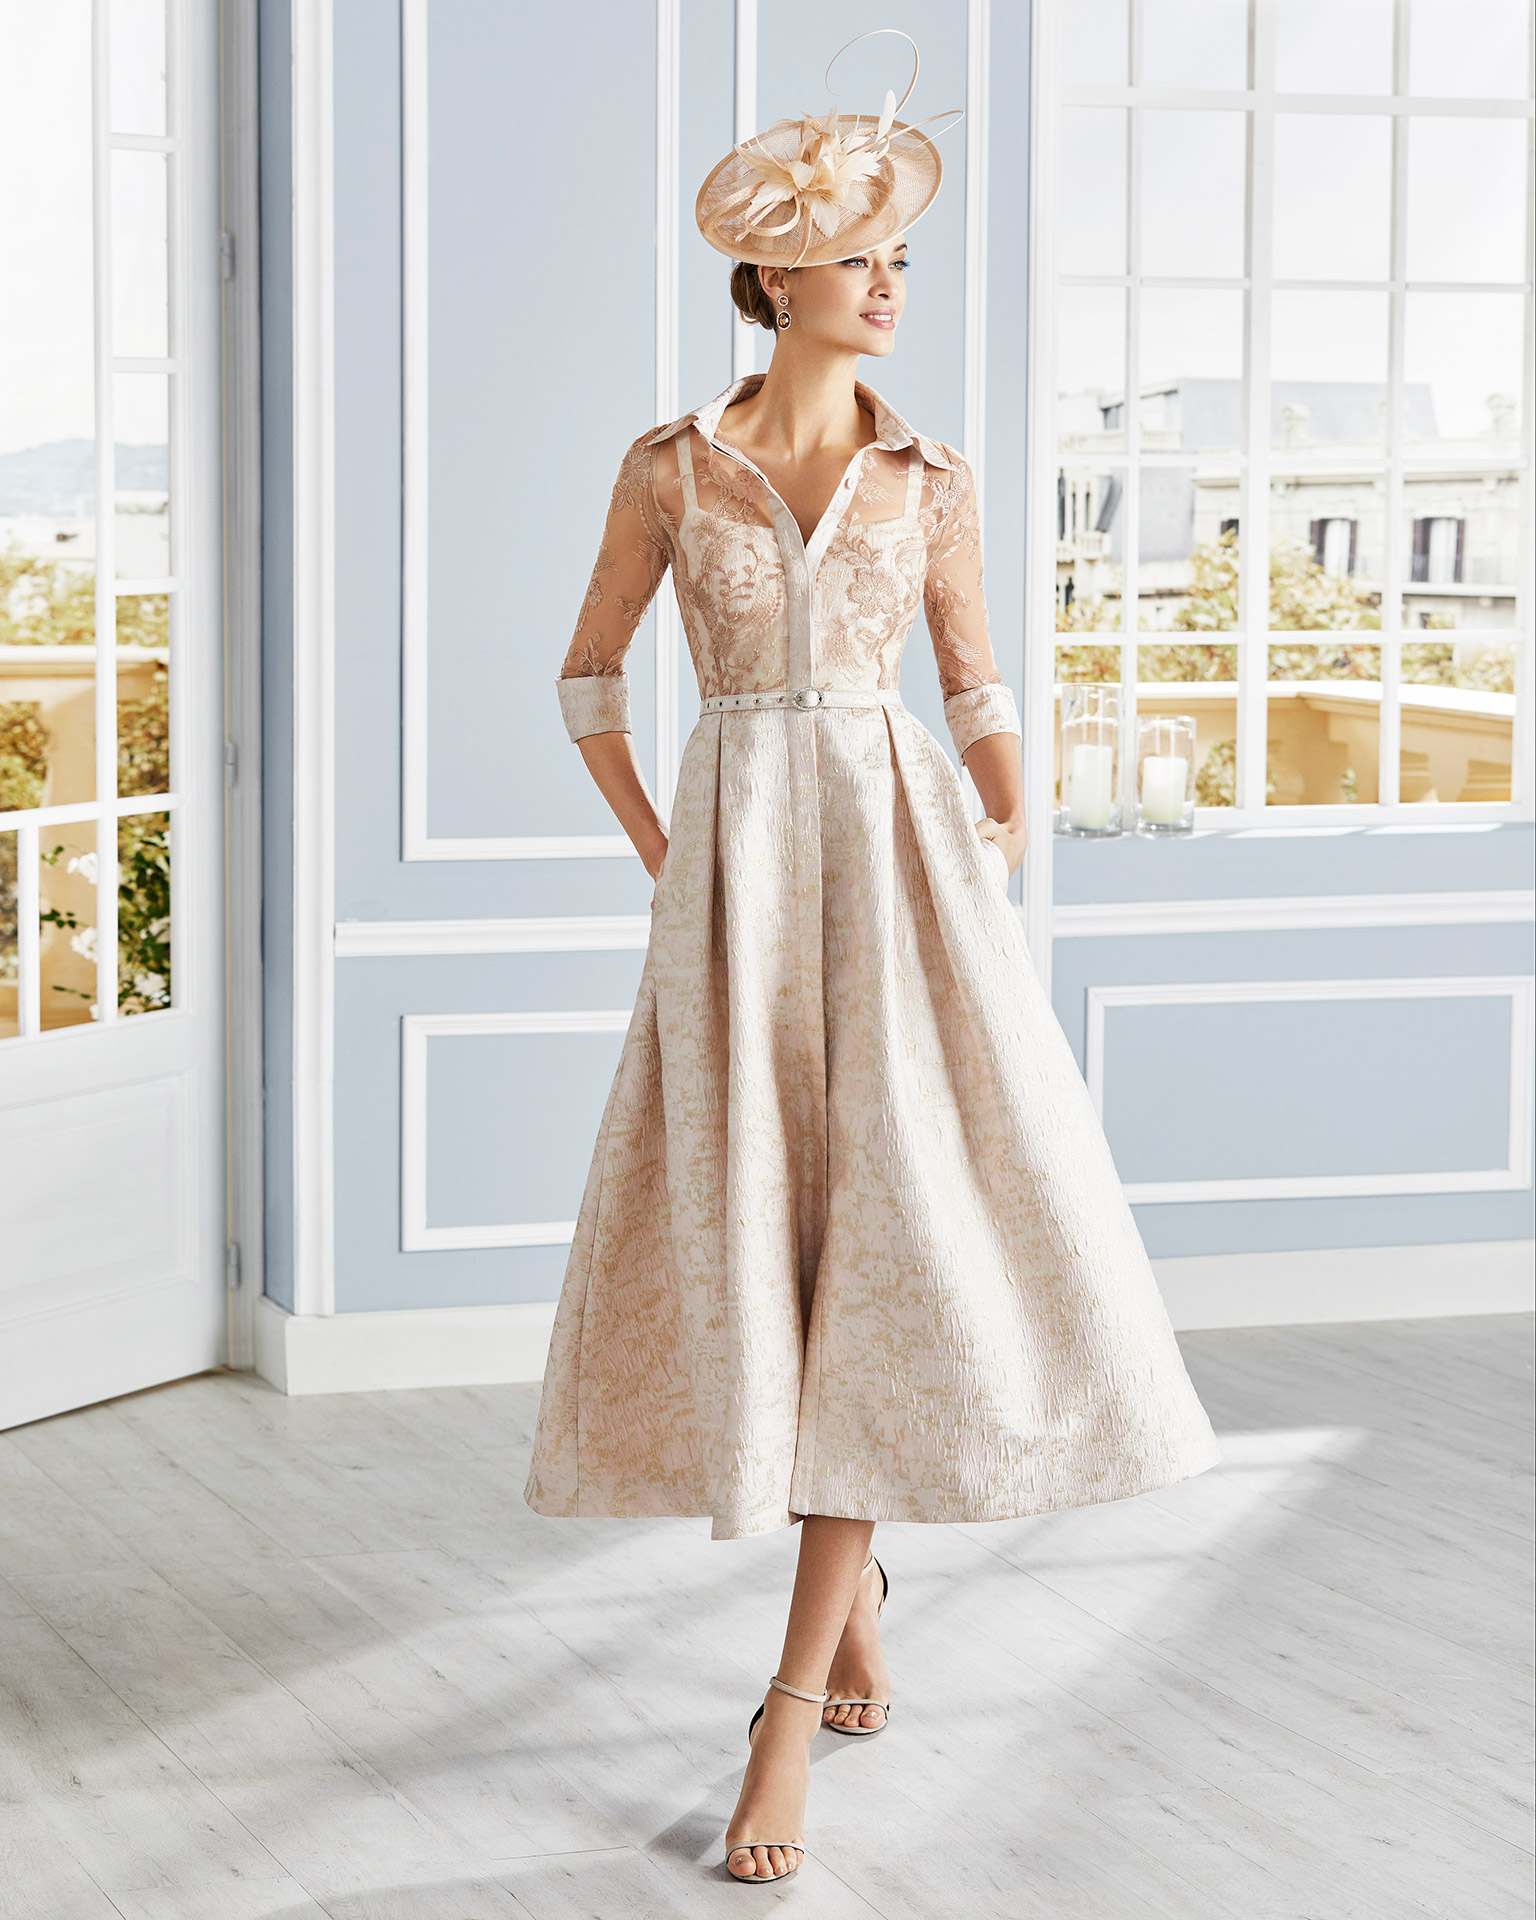 Cocktail dress in brocade with lace on the bodice. Button collar neckline and three-quarter sleeves. 2020 COUTURE CLUB Collection.